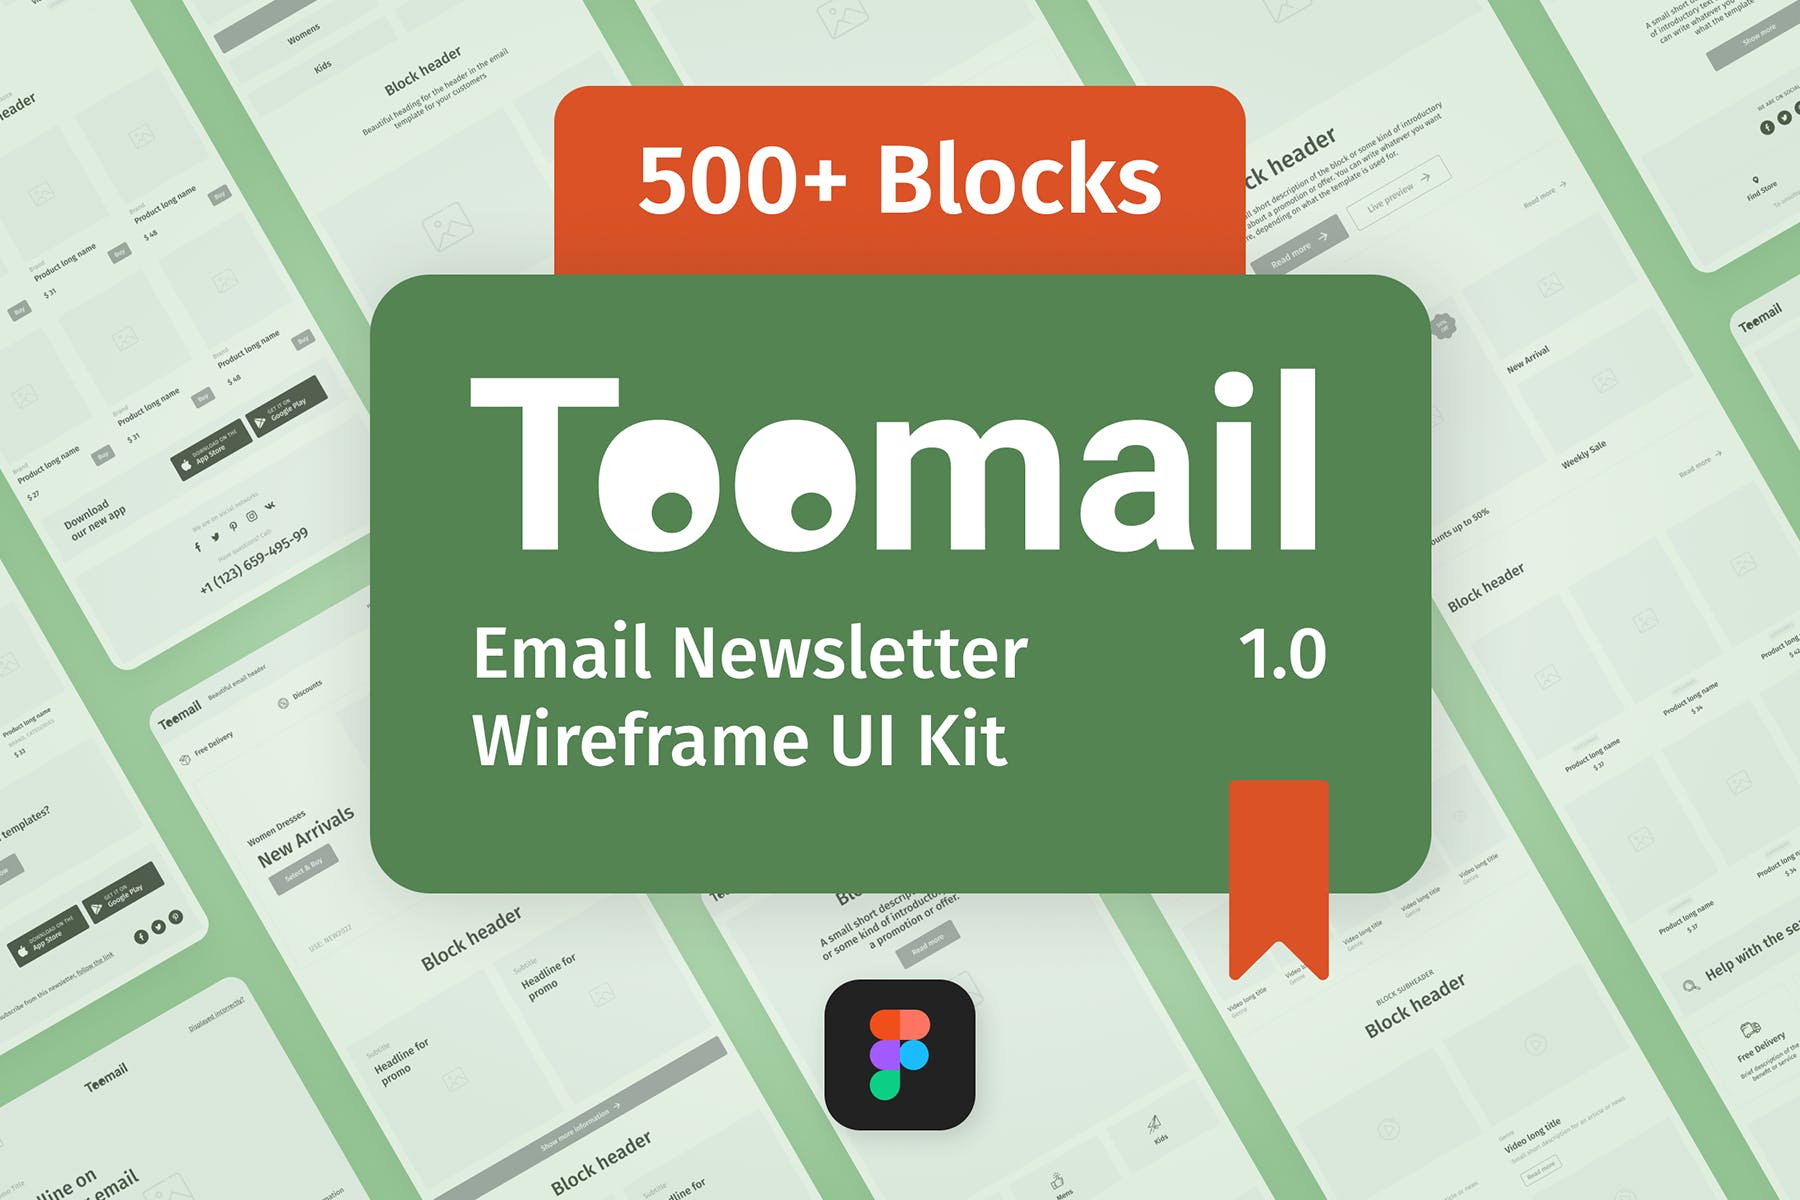 Toomail - Email Newsletter Wireframe UI Kit